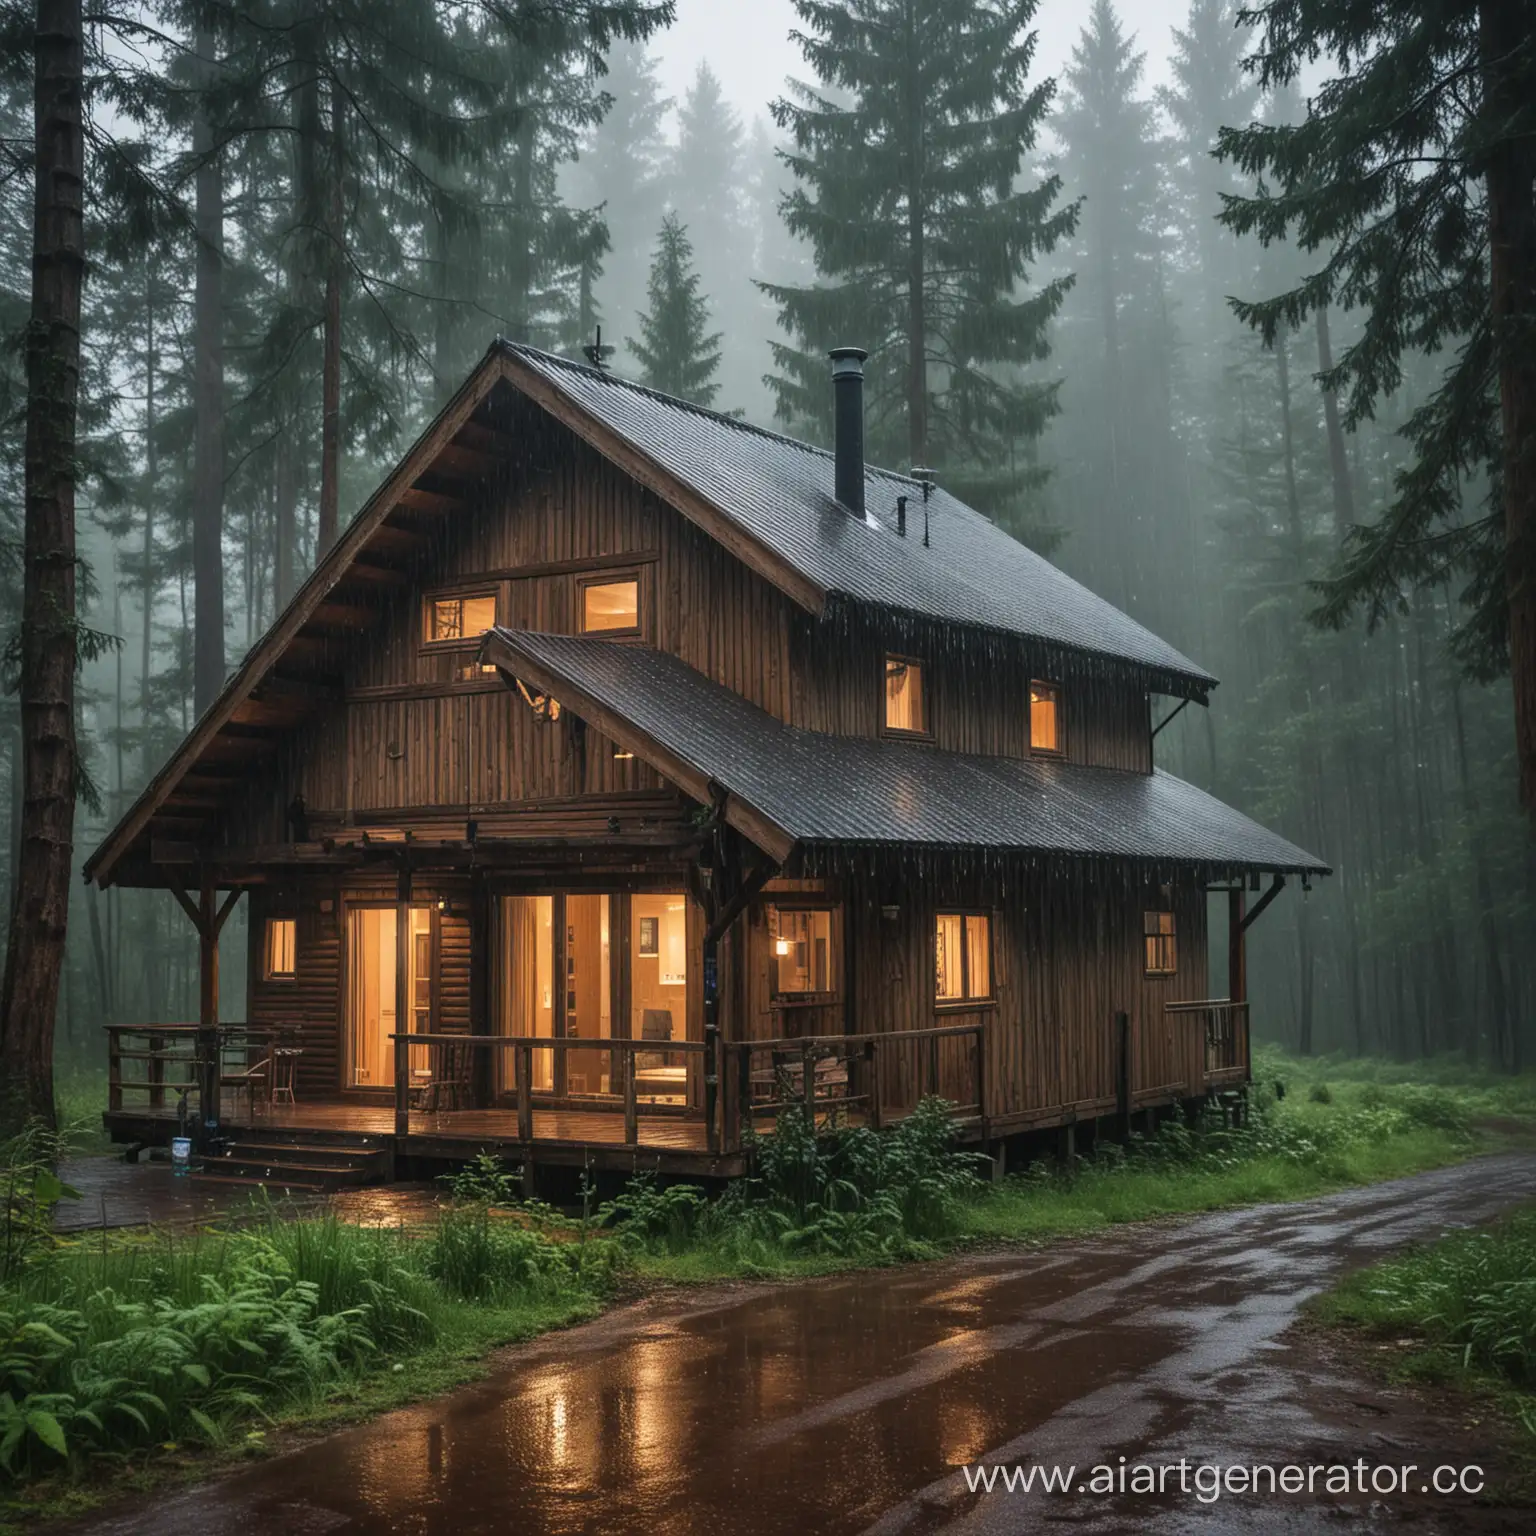 Cozy-Wooden-Cabin-Amidst-Lush-Forest-During-a-Gentle-Rain